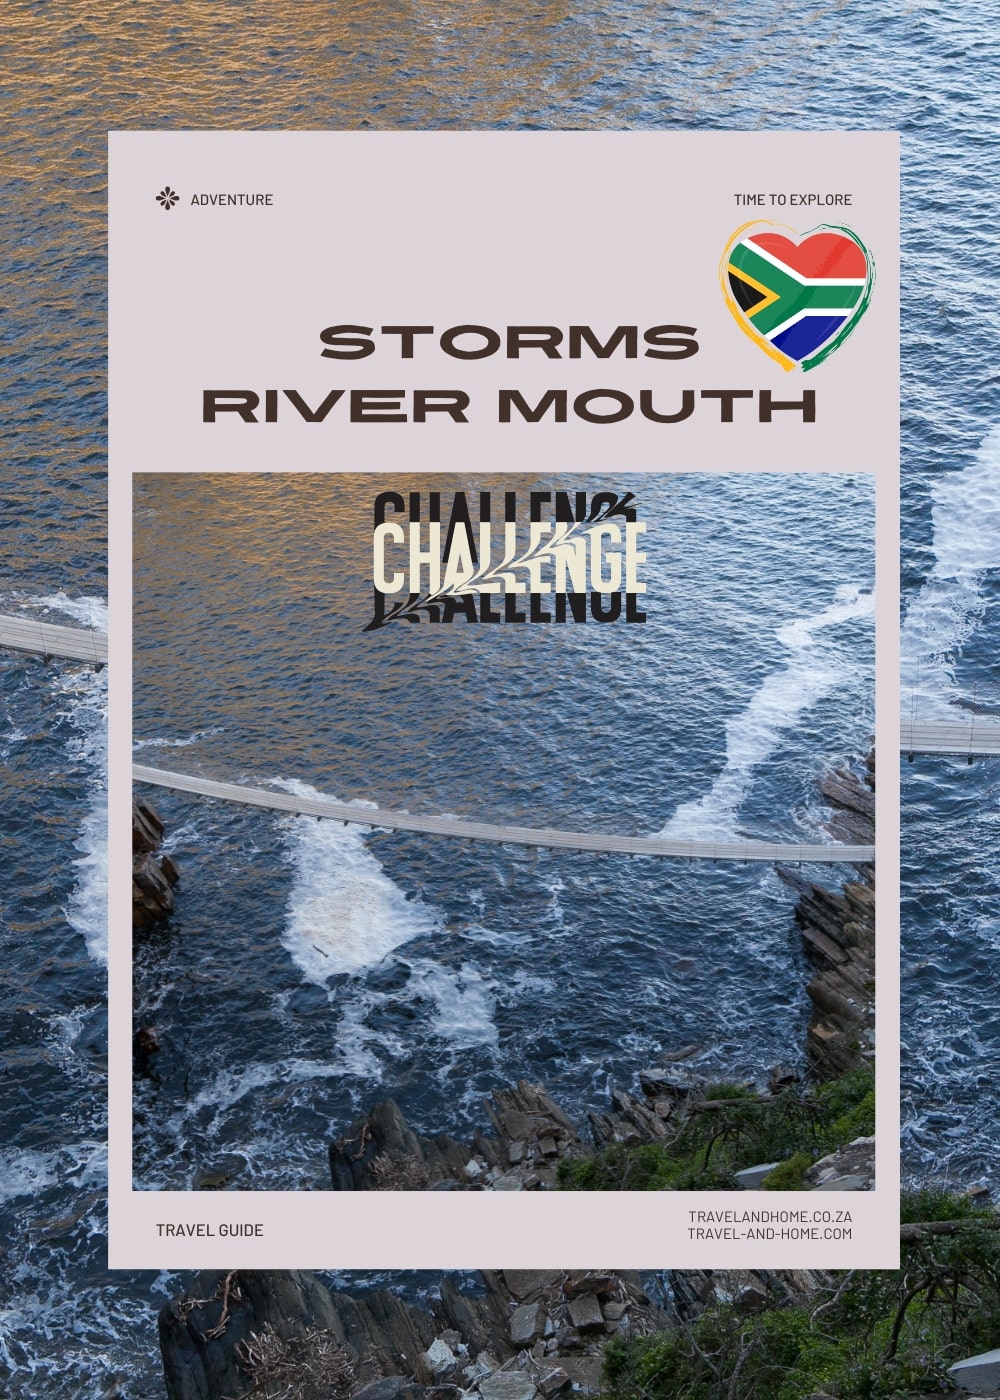 Storms river mouth, where is the highest bungy jumping in south africa, broukrans bridge bungy jump meters, feet min